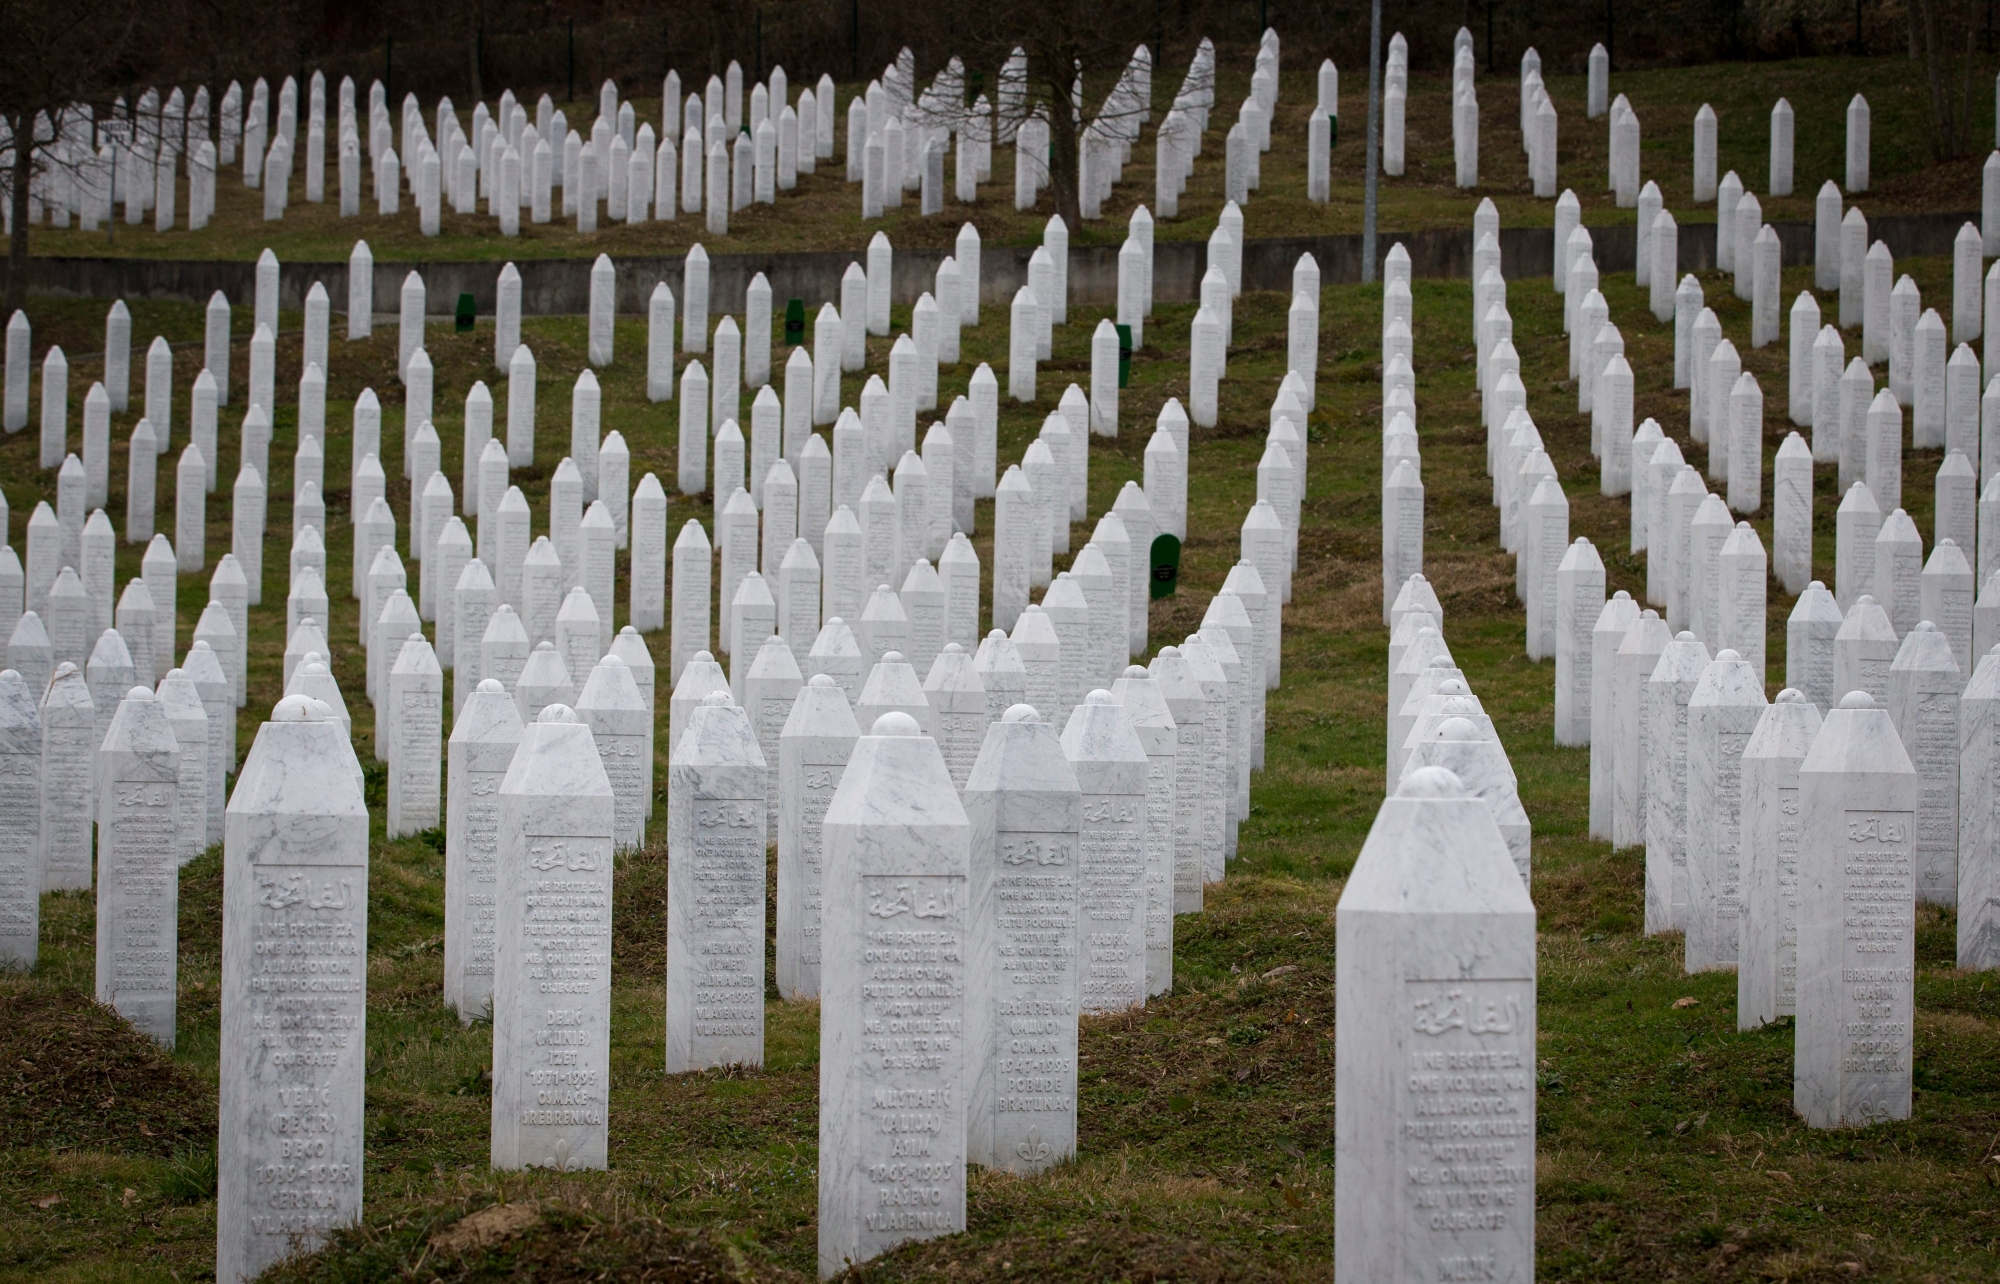 This Saturday, March 16, 2019 photo shows tombs at the memorial cemetery for massacre victims in Potocari, near Srebrenica, Bosnia-Herzegovina. Nearly a quarter of a century since Bosnia's devastating war ended, former Bosnian Serb leader Radovan Karadzic is set to hear the final judgment on whether he can be held criminally responsible for unleashing a wave of murder and mistreatment by his administration's forces. United Nations appeals judges on Wednesday March 20, 2019 will decide whether to uphold or overturn Karadzic's 2016 convictions for genocide, crimes against humanity and war crimes and his 40-year sentence. (AP Photo/Darko Bandic) War Crimes Karadzic